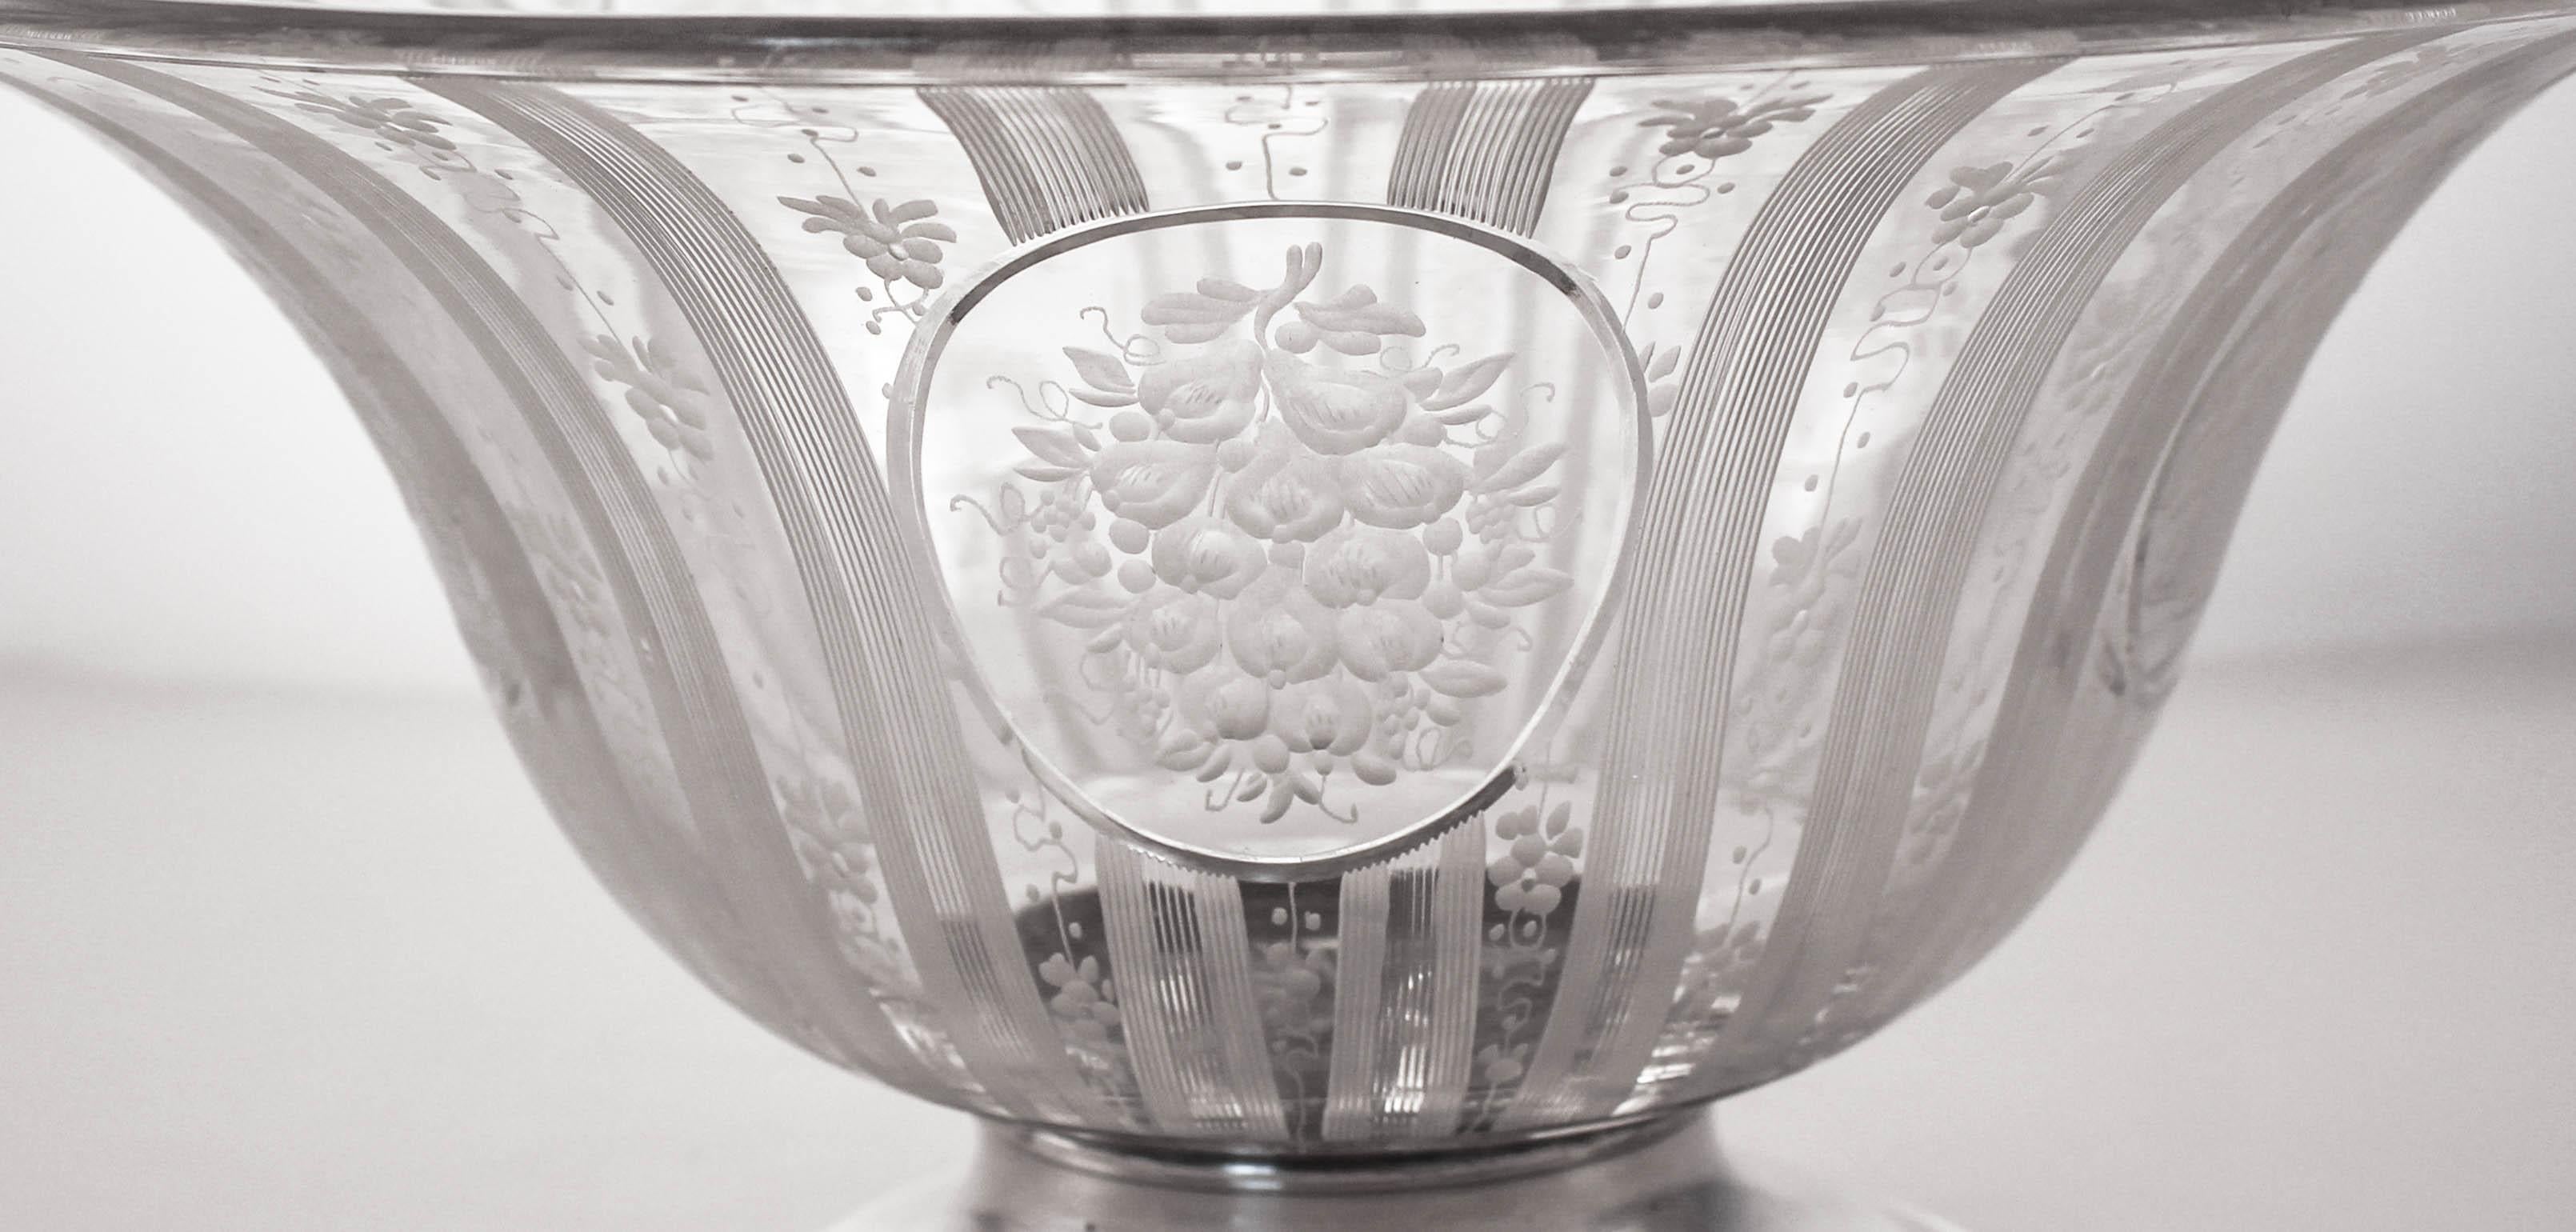 We are delighted to offer this sterling silver and crystal centerpiece bowl. It dates back to the early 20th century and has survived in mint condition. It features five acid-etched floral bouquets around the bowl. In between these there is